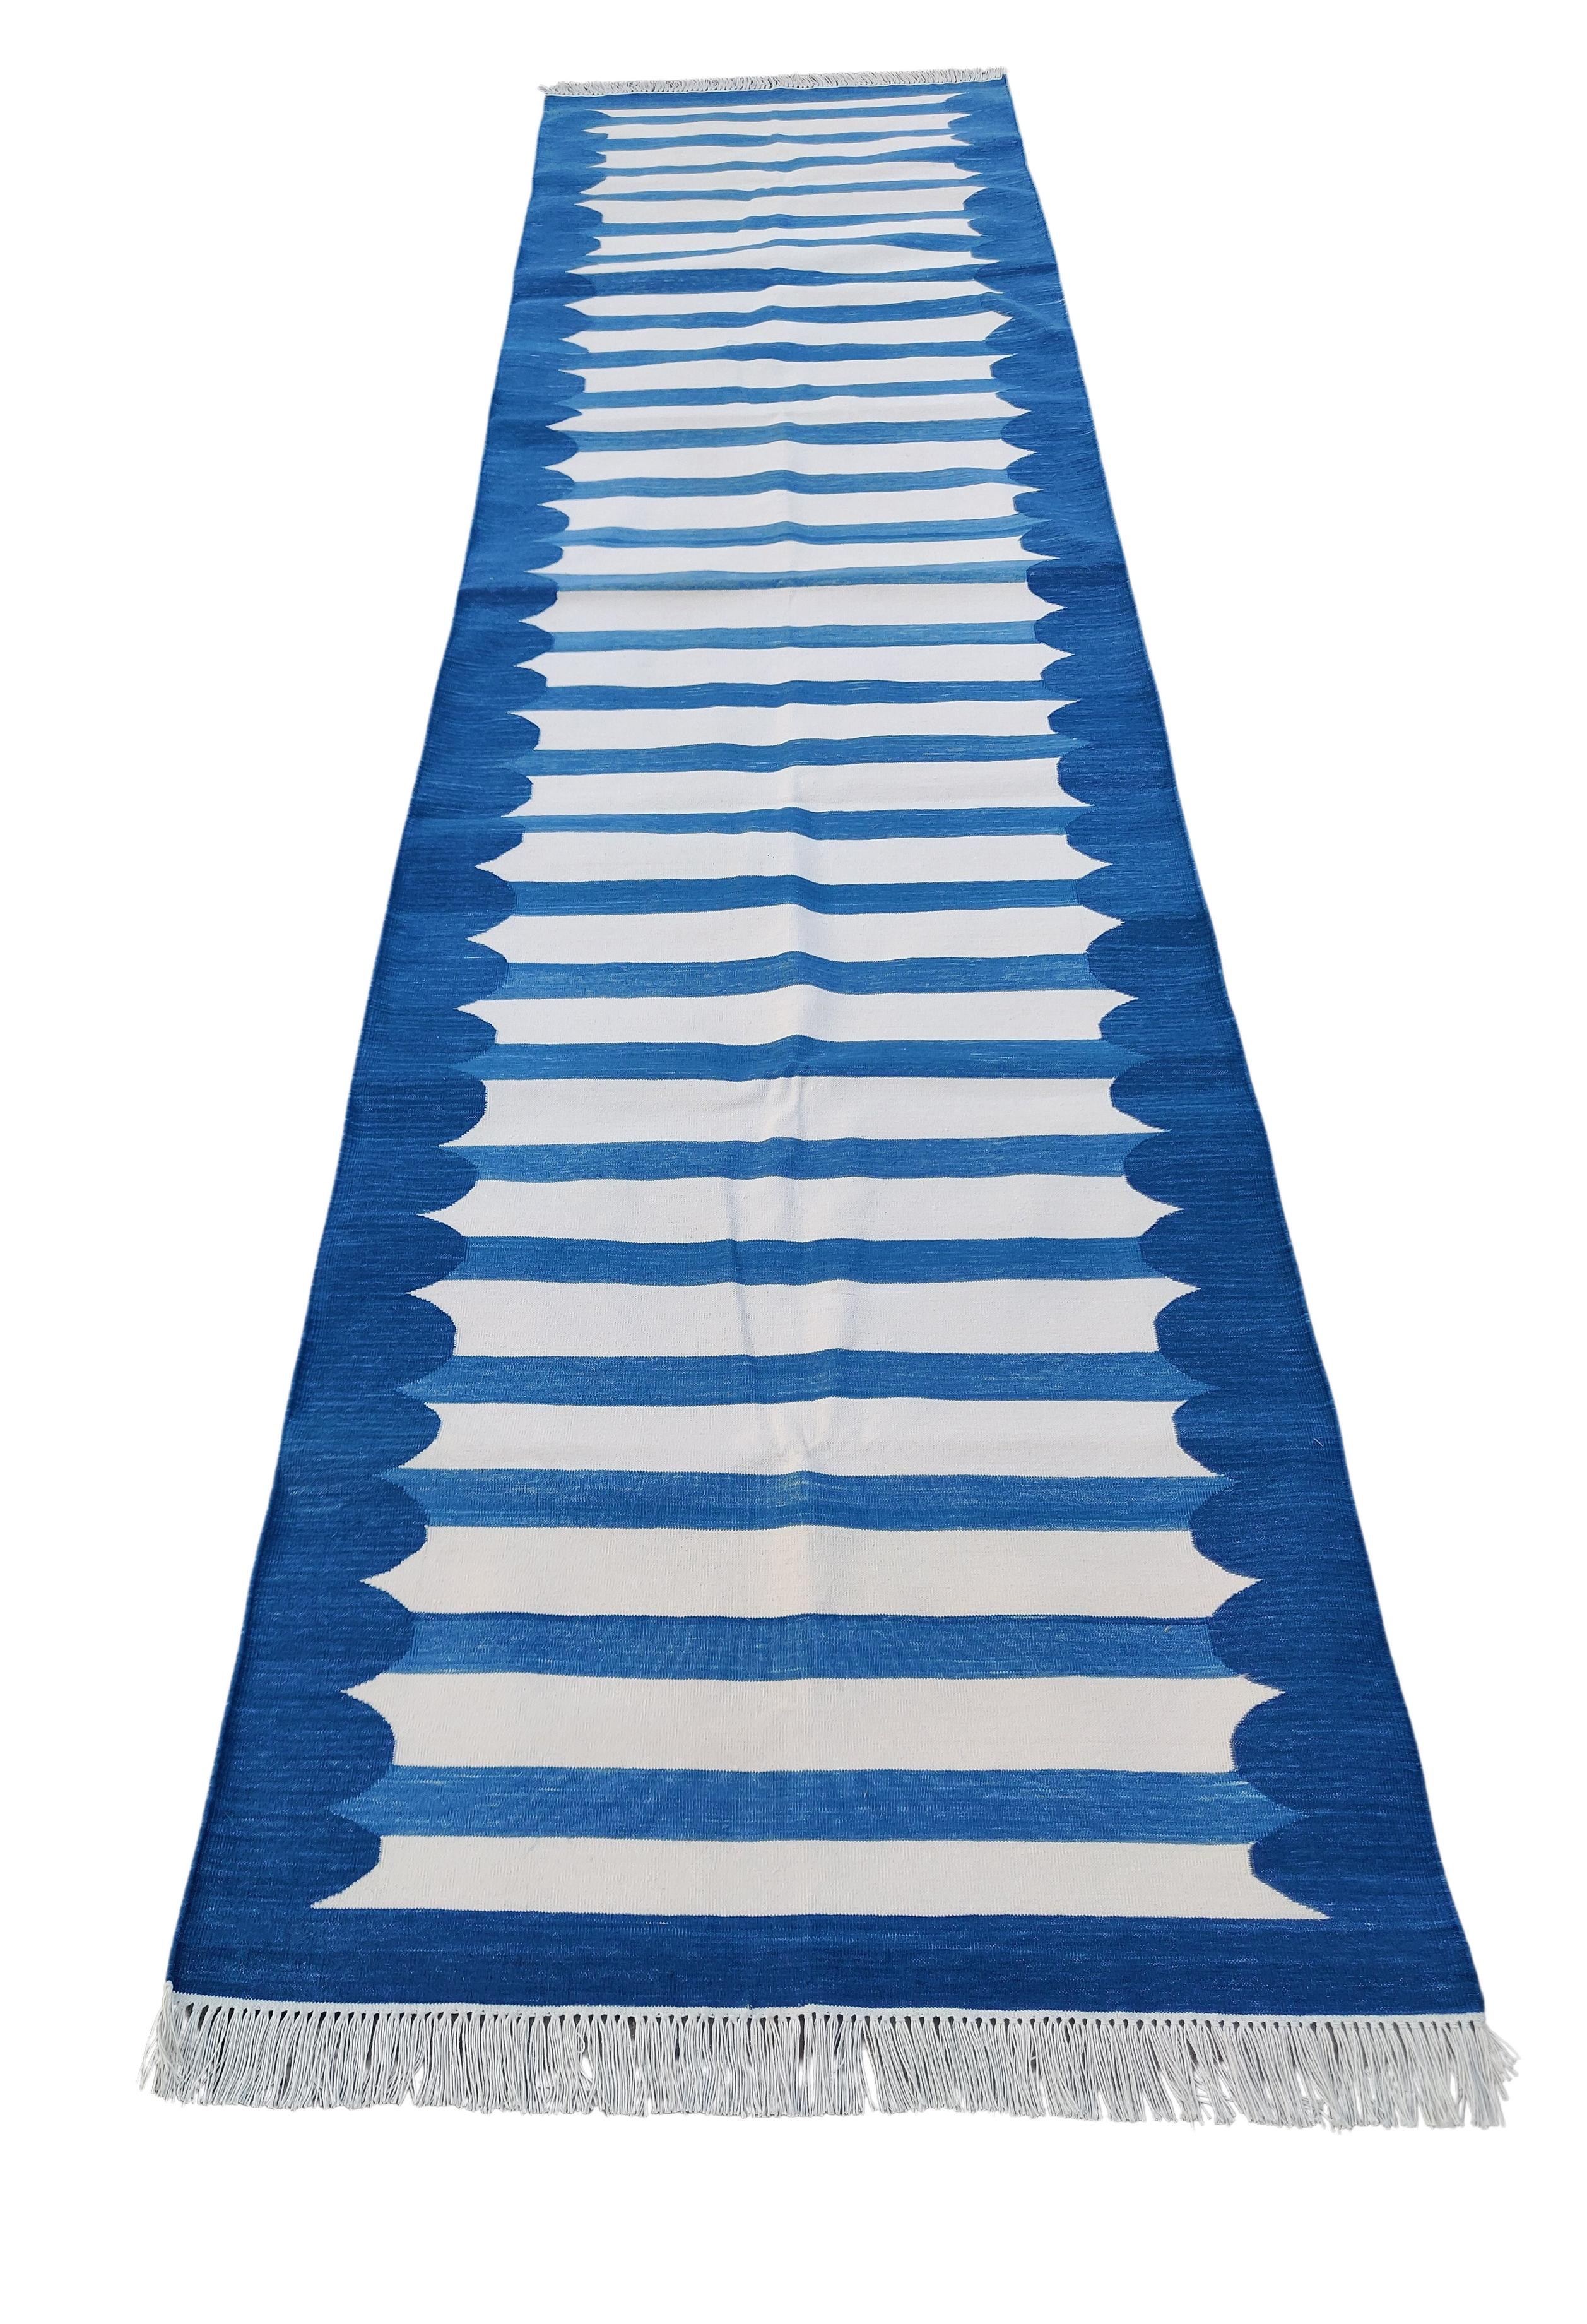 Hand-Woven Handmade Cotton Area Flat Weave Runner, 3x12 Blue, White Scallop Indian Dhurrie For Sale